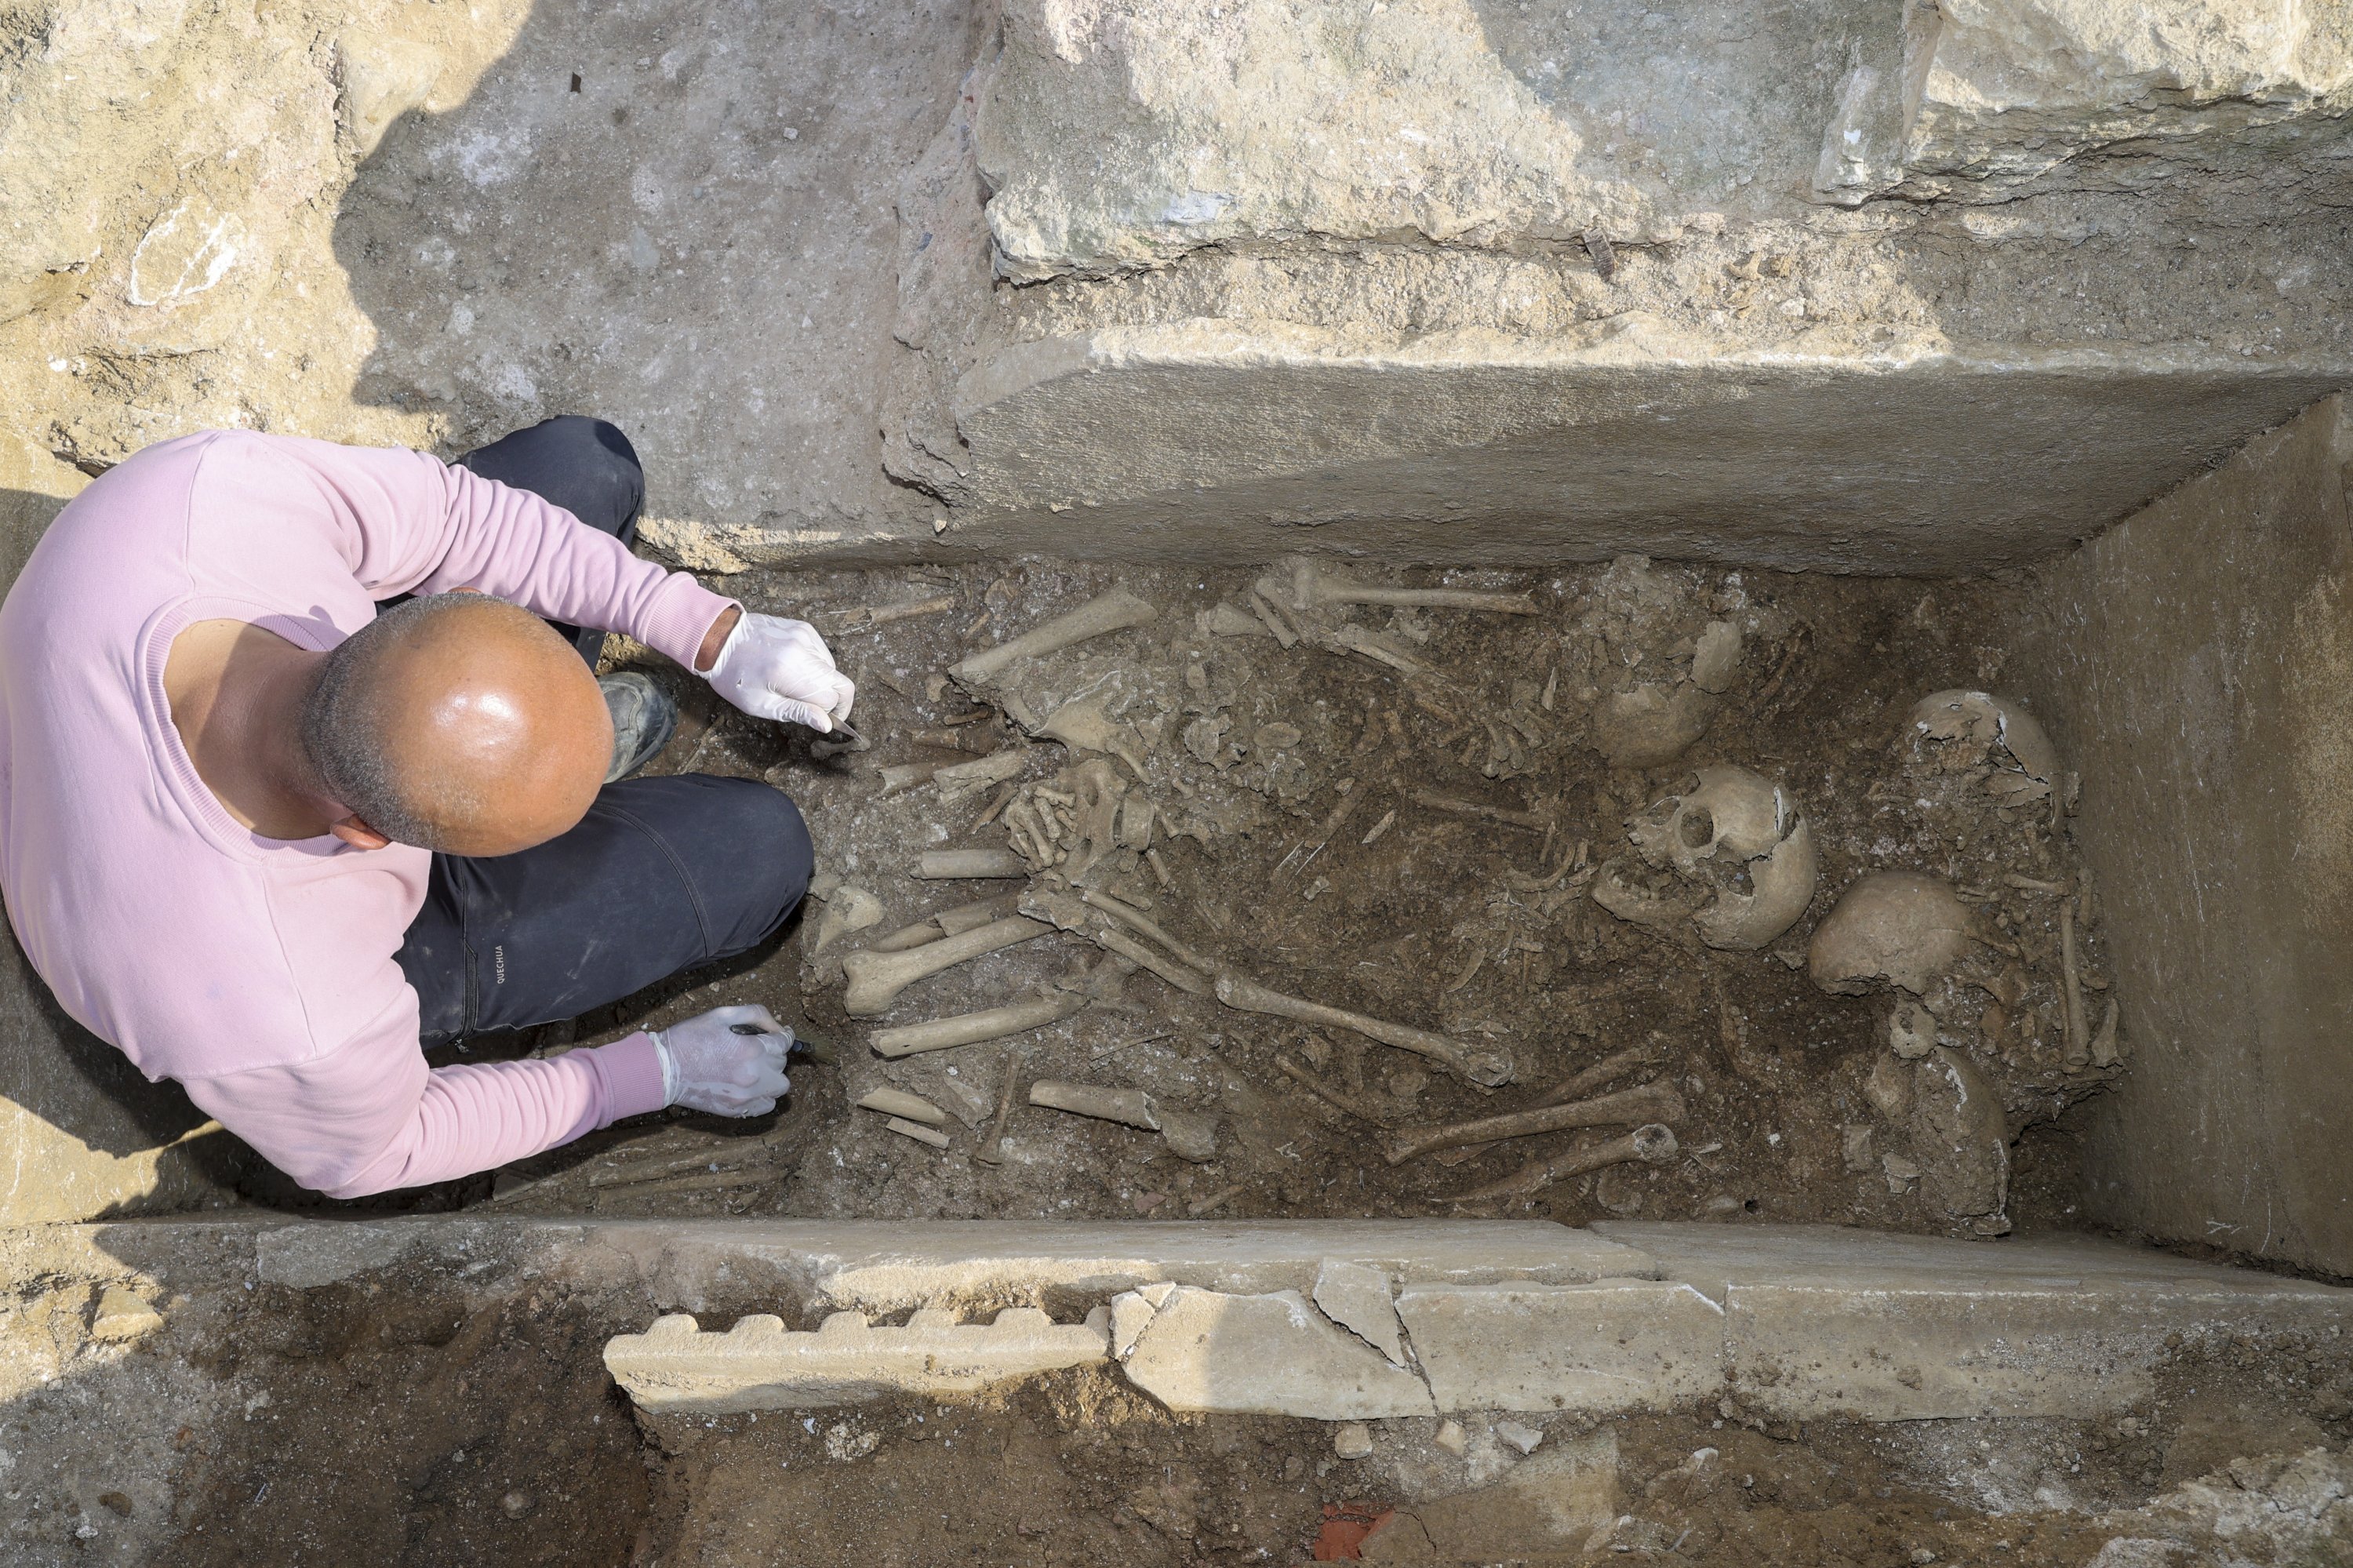 An expert work on human remains and skeletons at the Haydarpaşa excavation area in Kadıköy, Istanbul, on Oct. 12, 2021. (AA Photo)